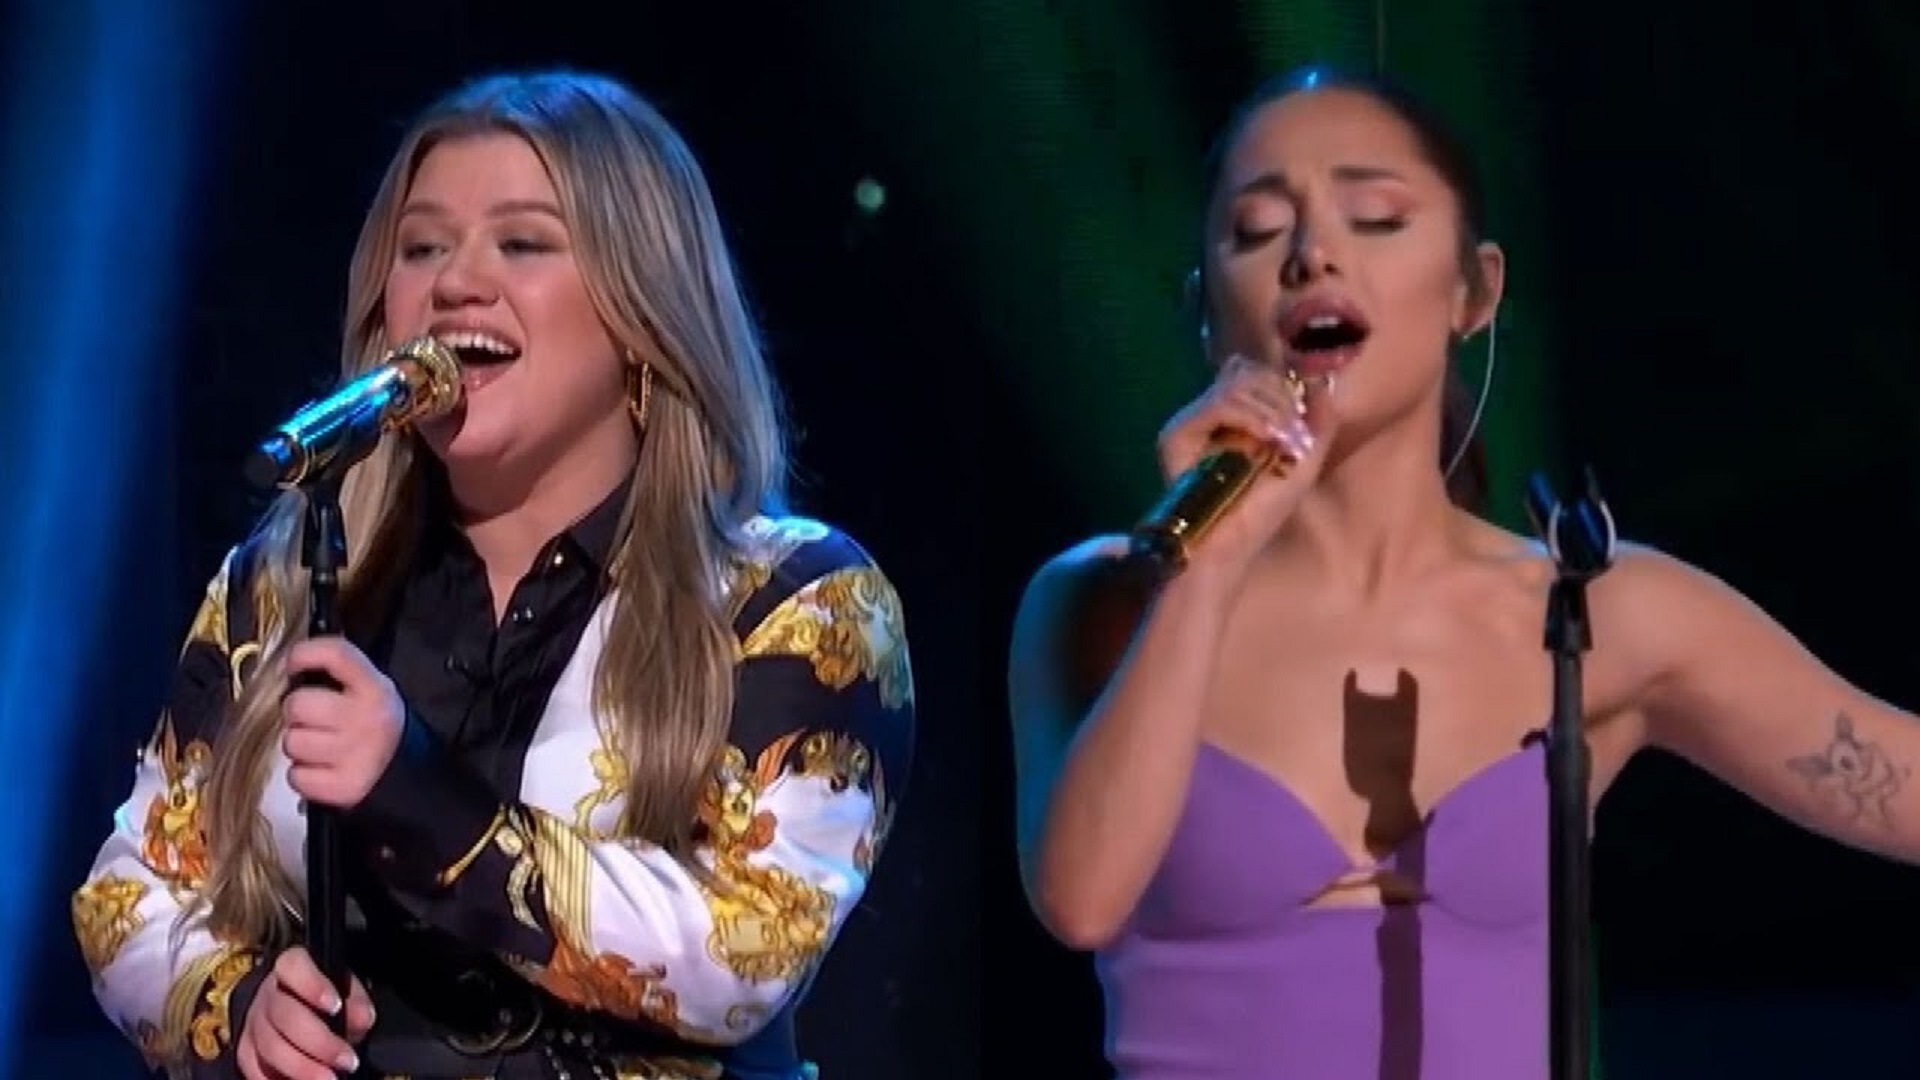 Watch: Kelly Clarkson & Ariana Grande Do A Vocal Showdown Singing Diva Classics From Whitney, Celine, Toni & More